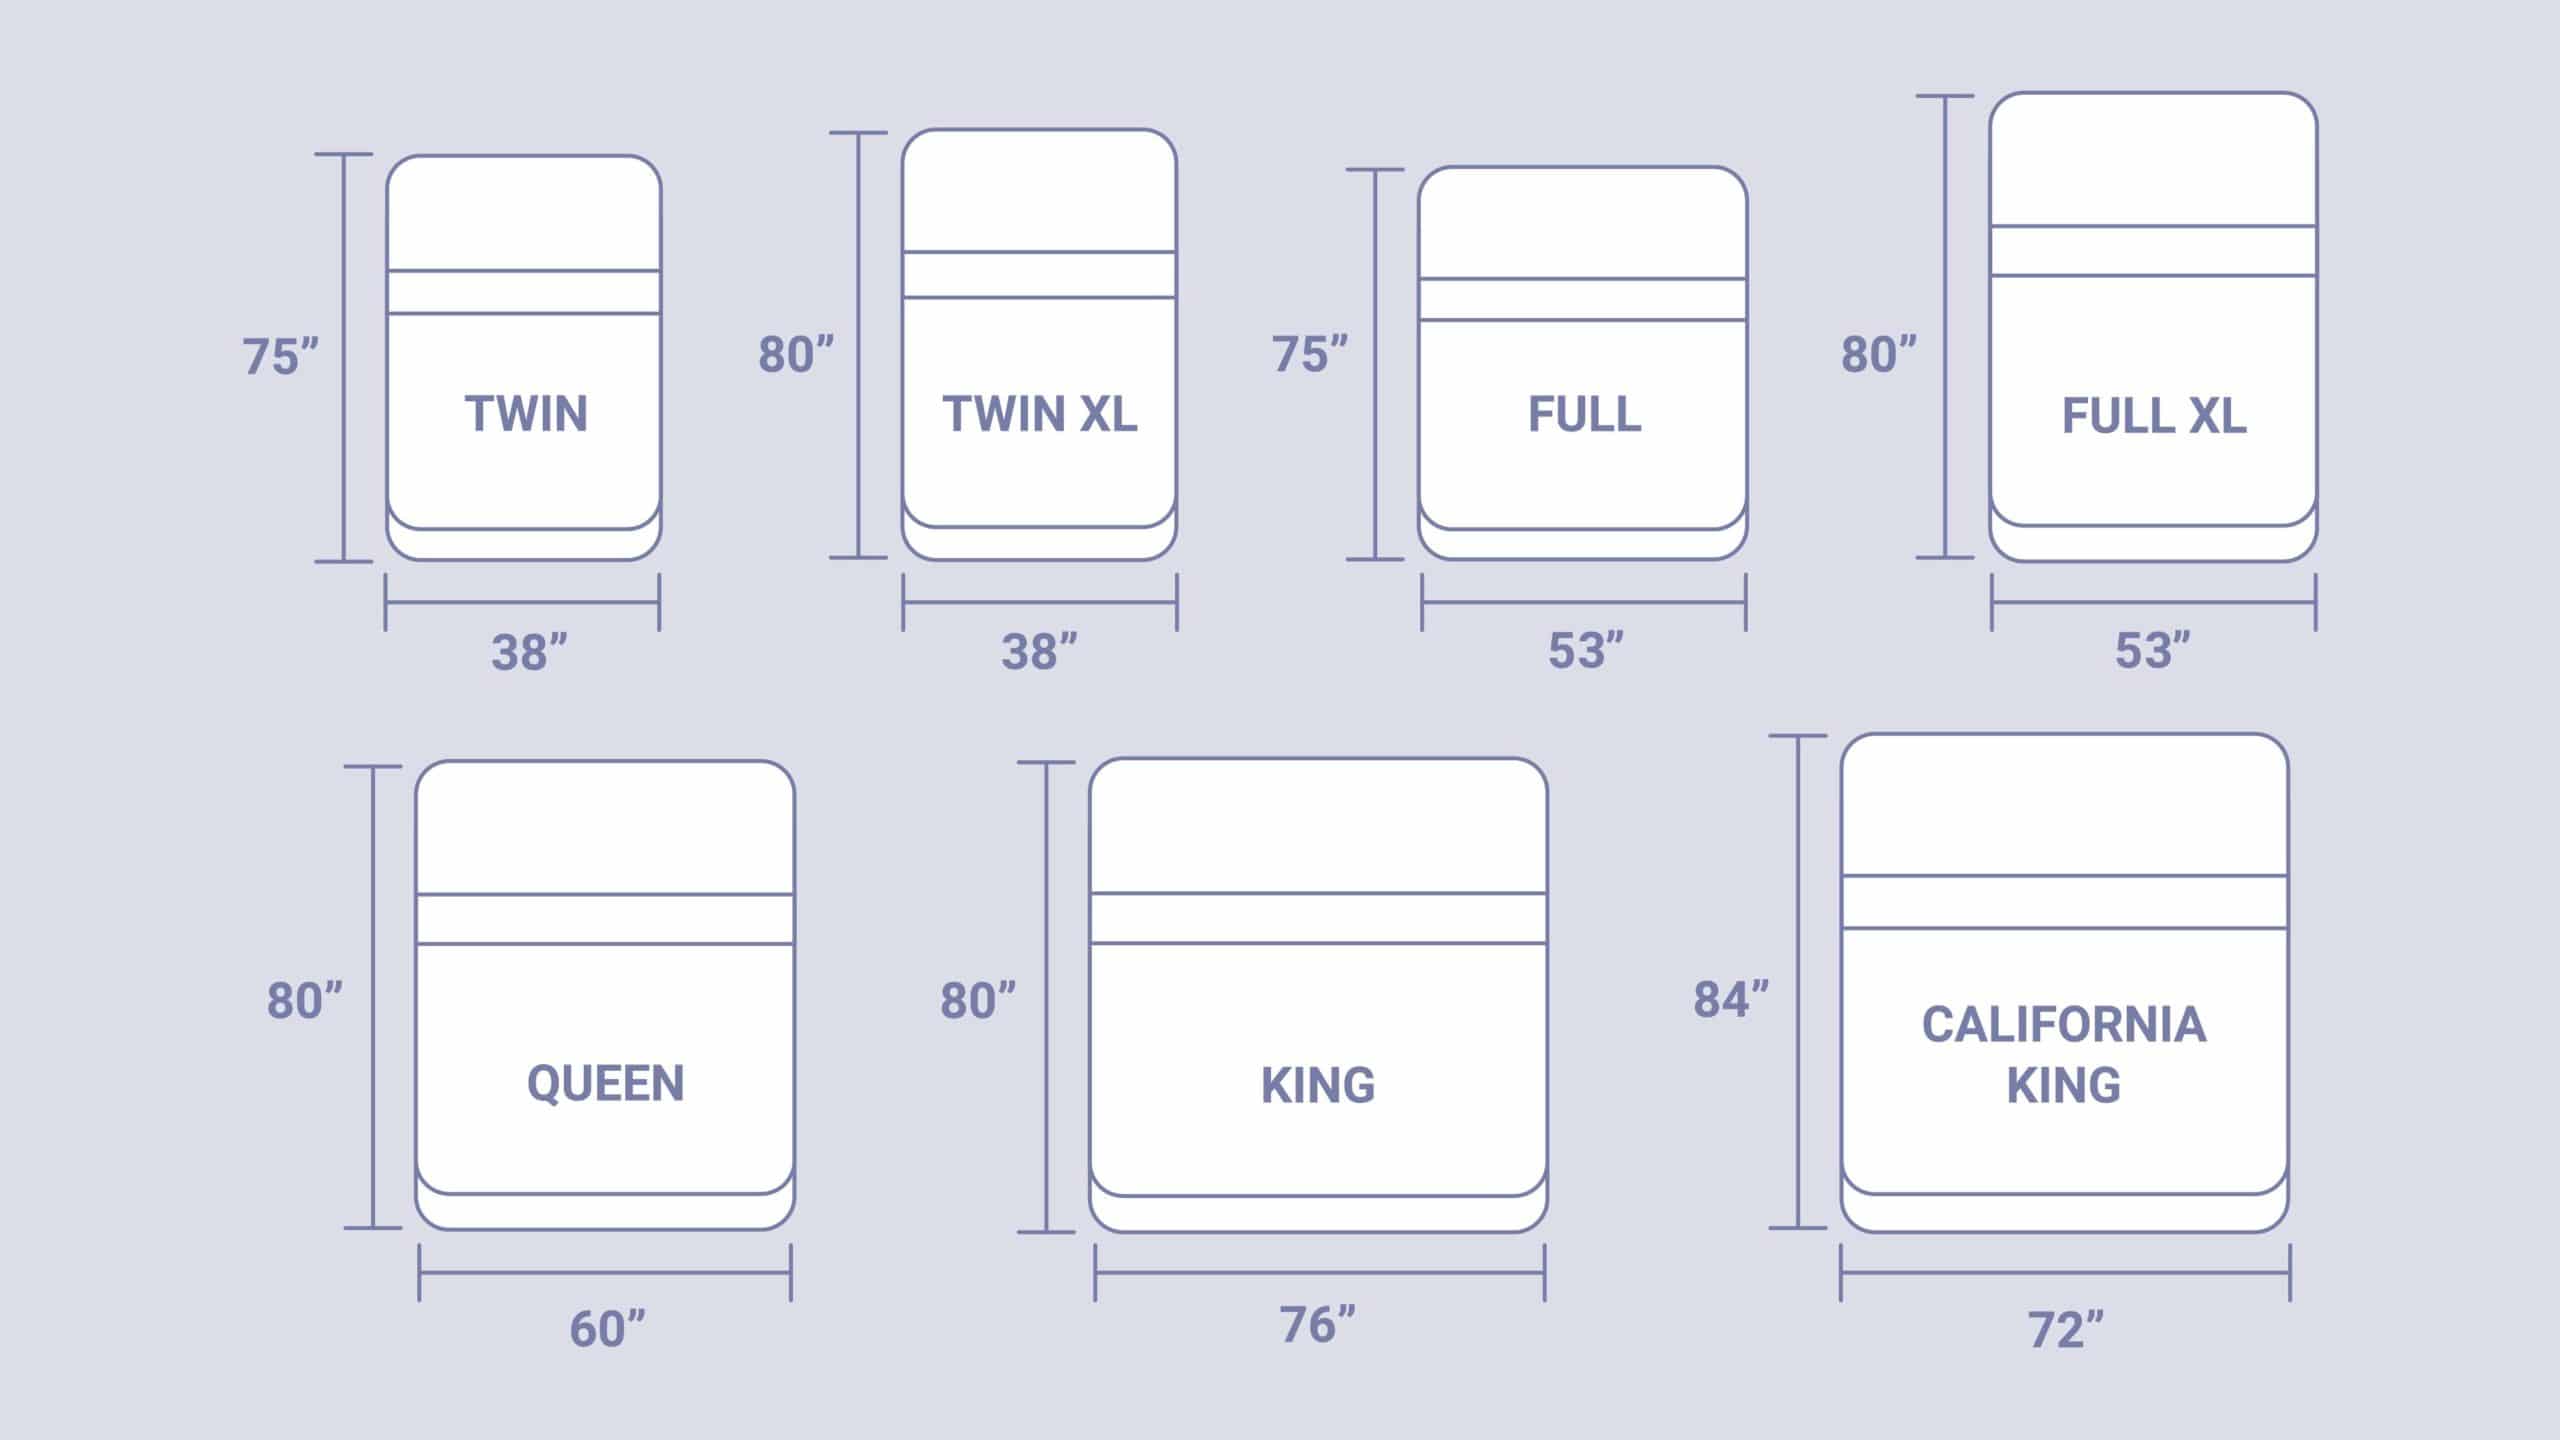 Mattress Sizes And Dimensions Guide, Bed Size Full Vs Queen King